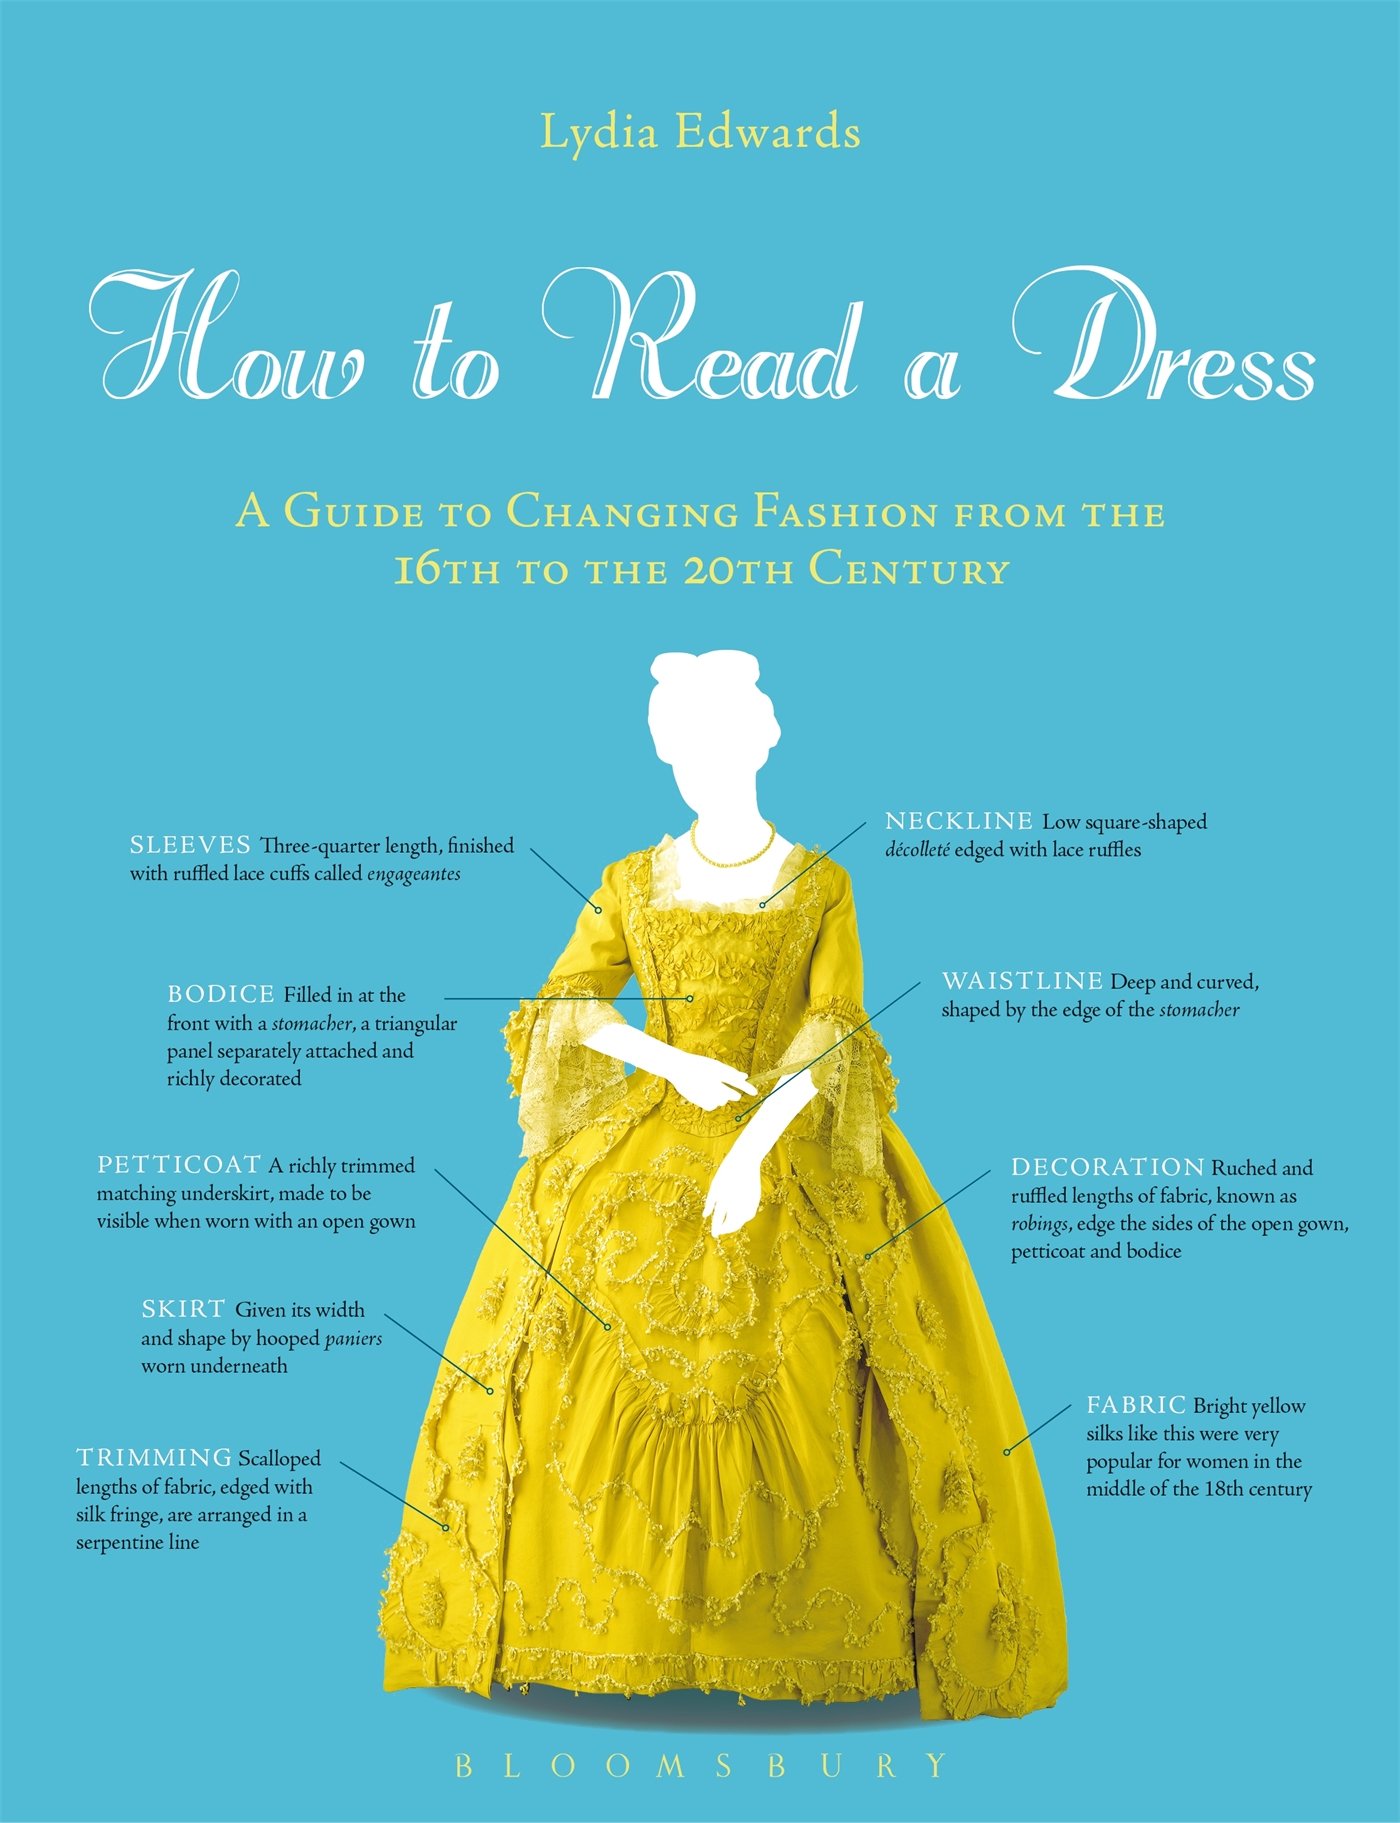 How to Read a Dress by Lydia Edwards